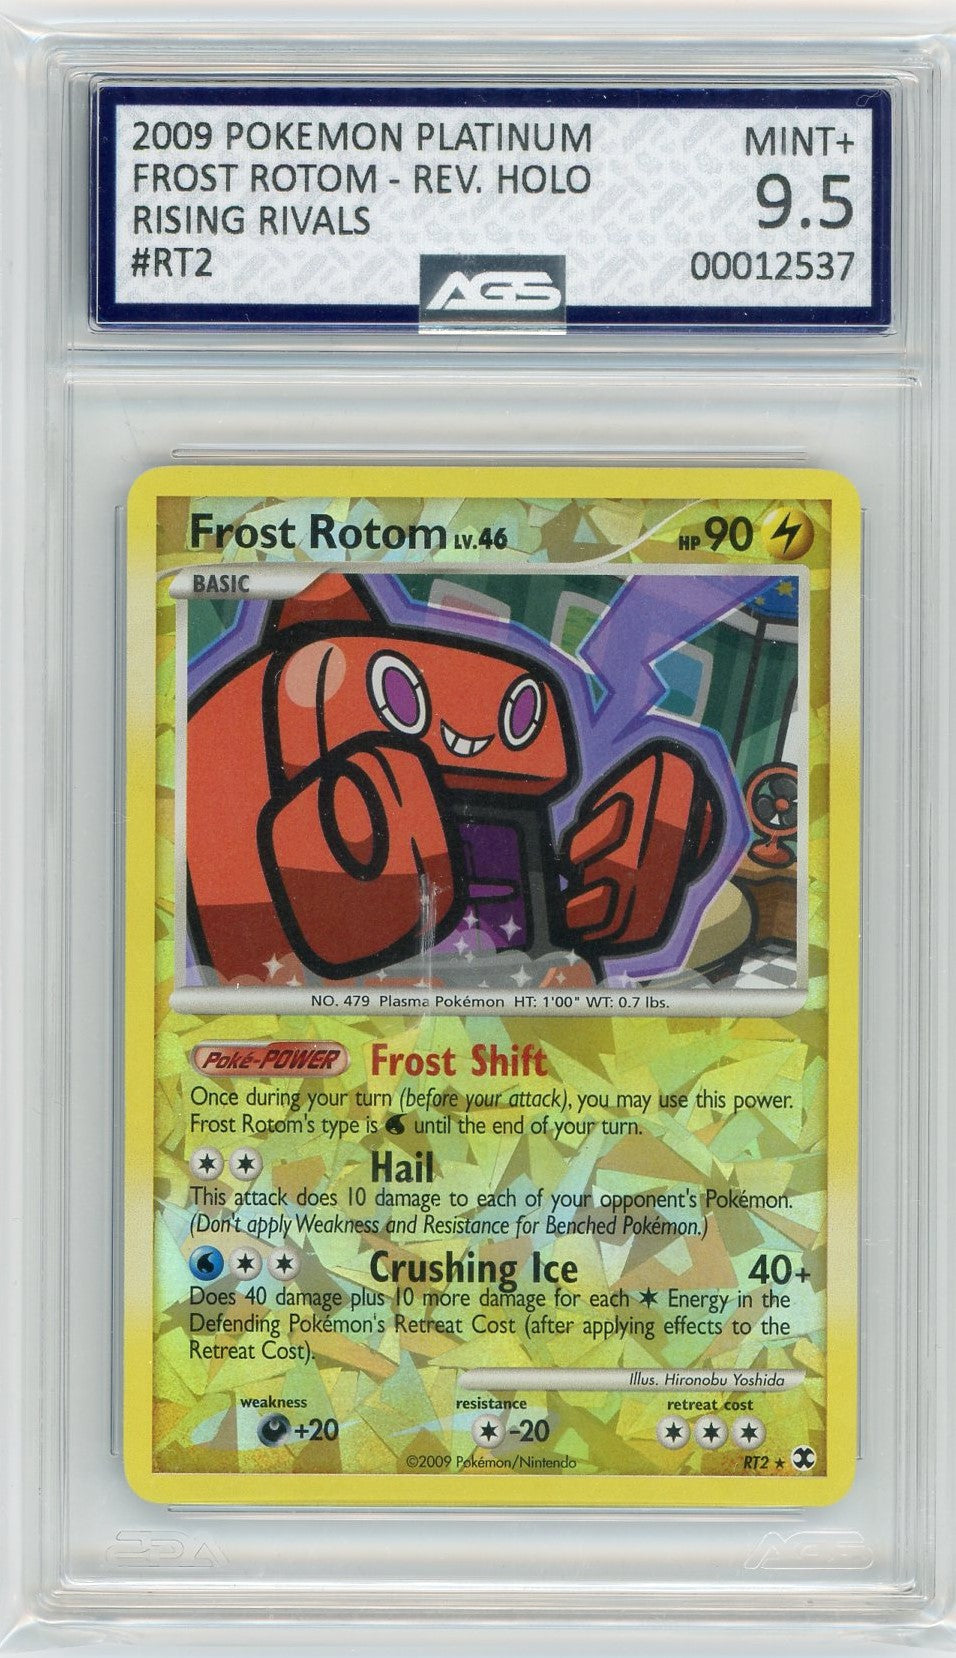 AGS (MINT+ 9.5) Frost Rotom #RT2 - Platinum - Rising Rivals (#00012537)